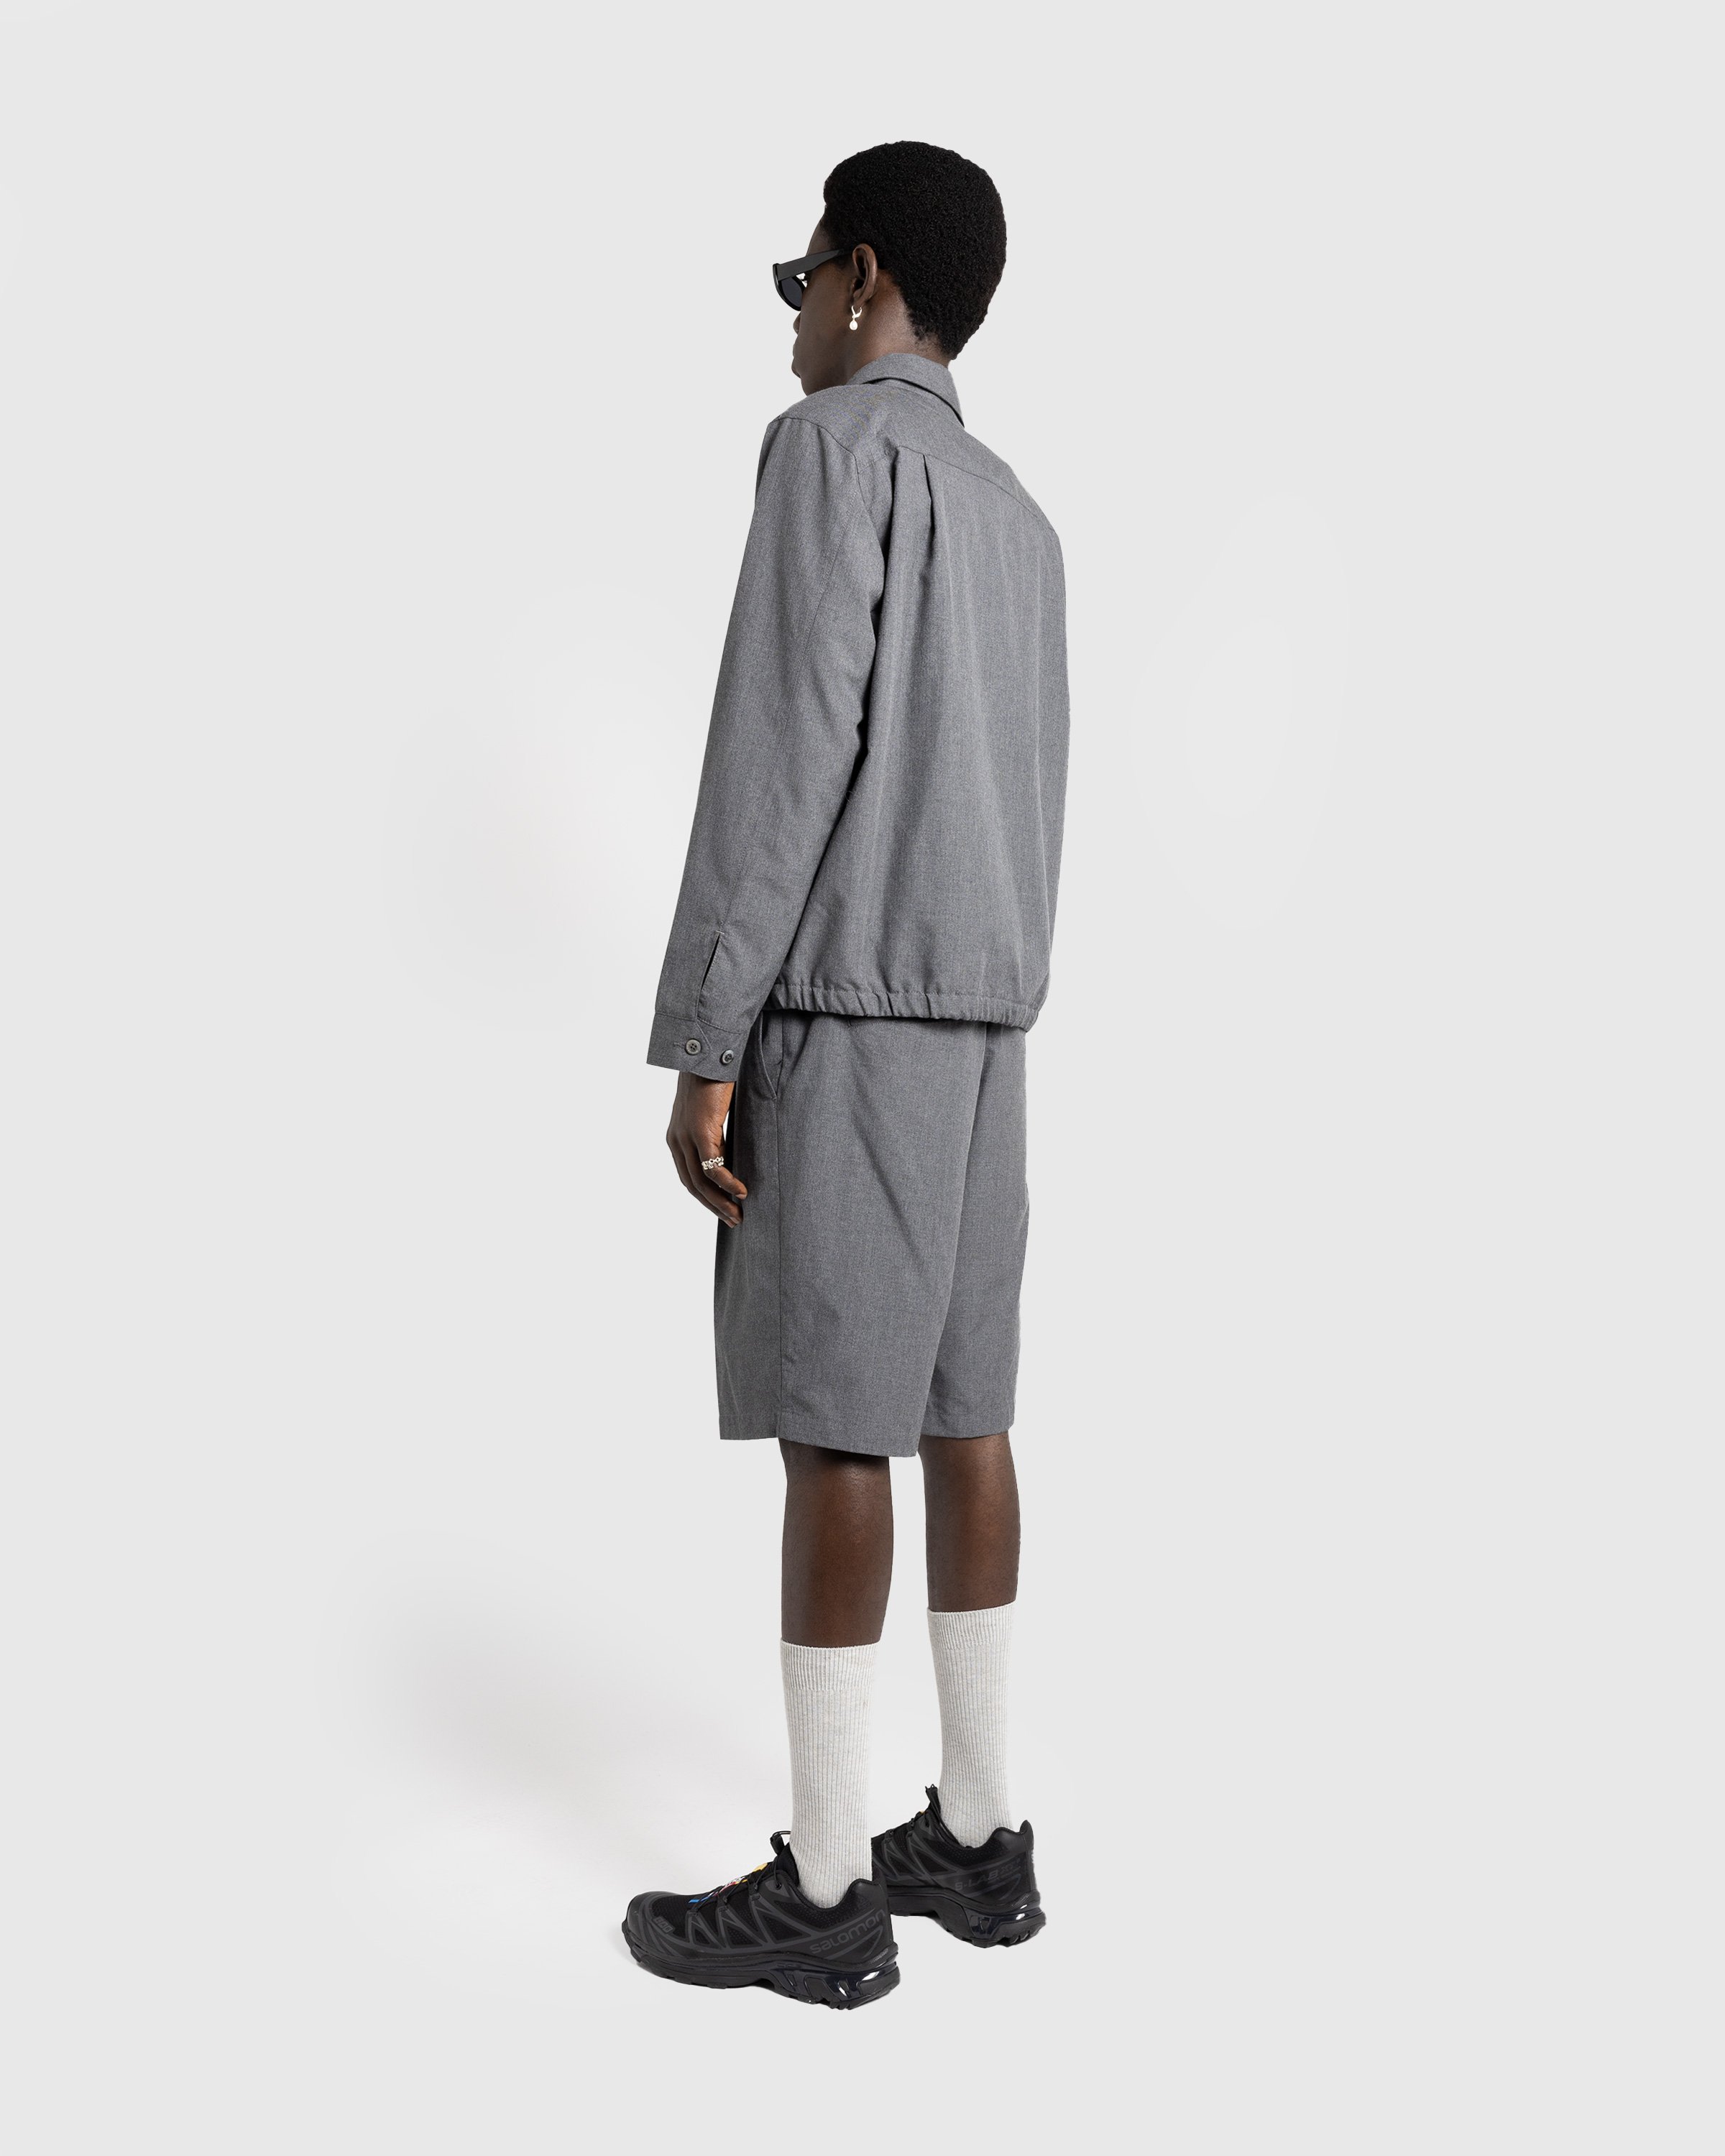 Highsnobiety HS05 - Tropical Suiting Jacket - Clothing - Grey - Image 5